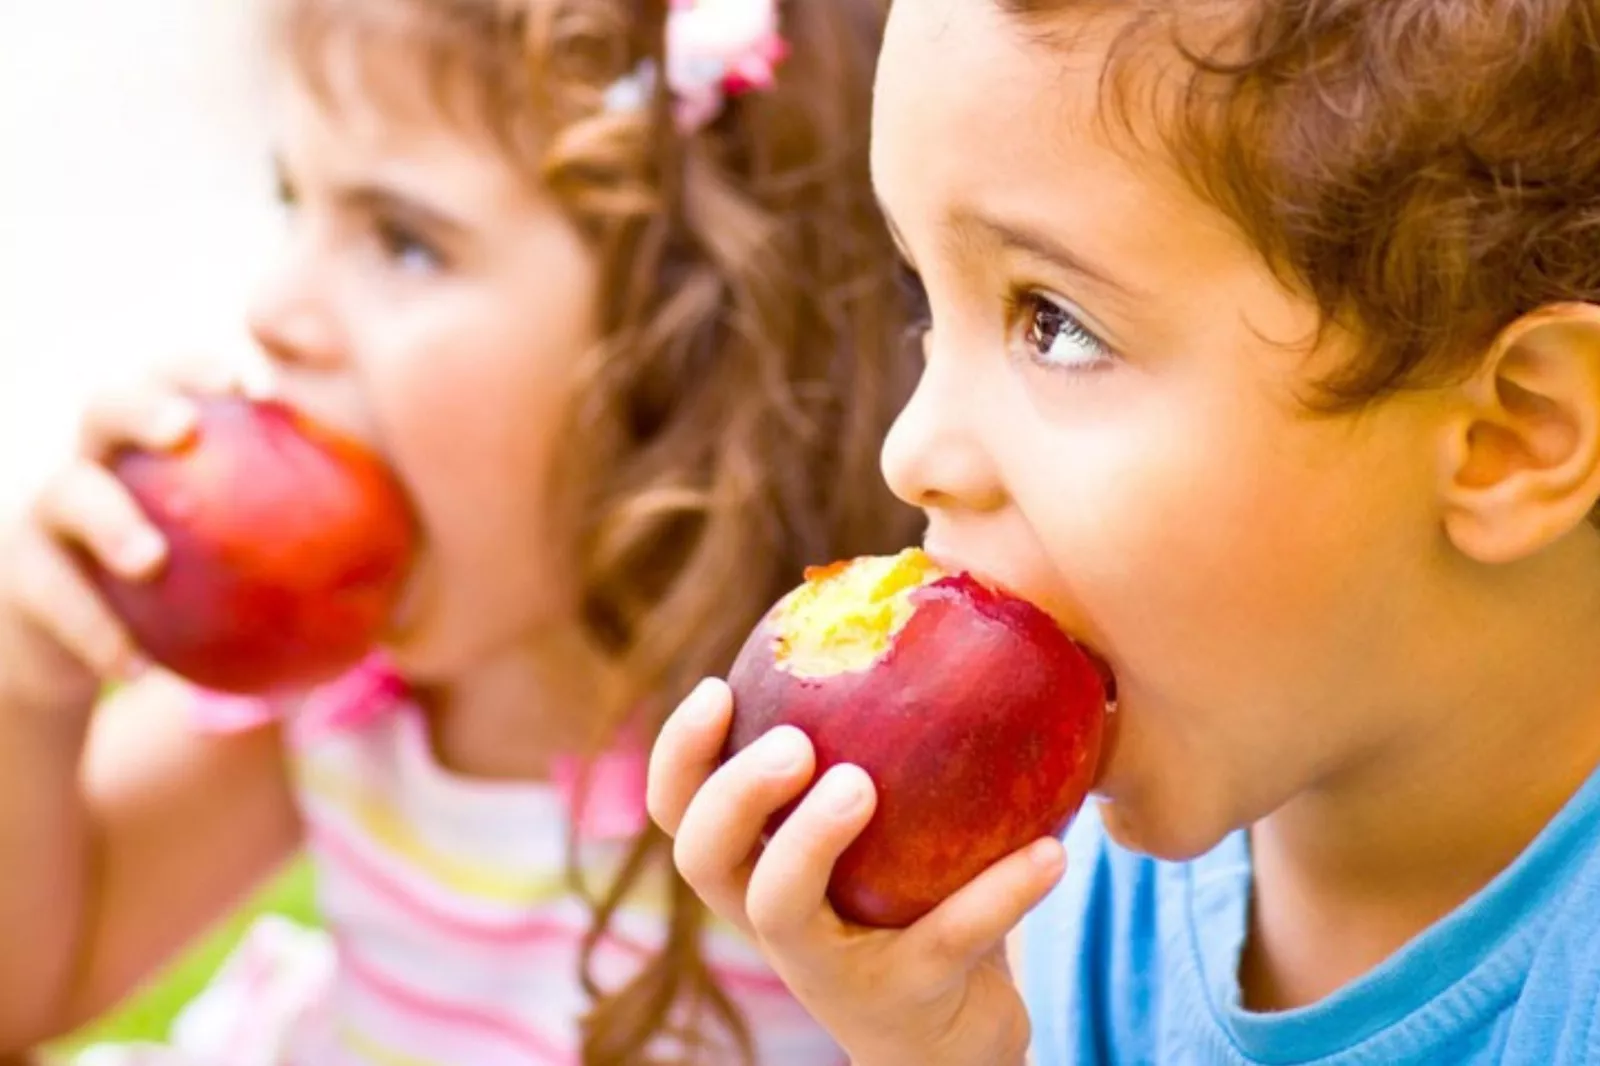 Children and teens consume only 20% of the recommended fruits and vegetables